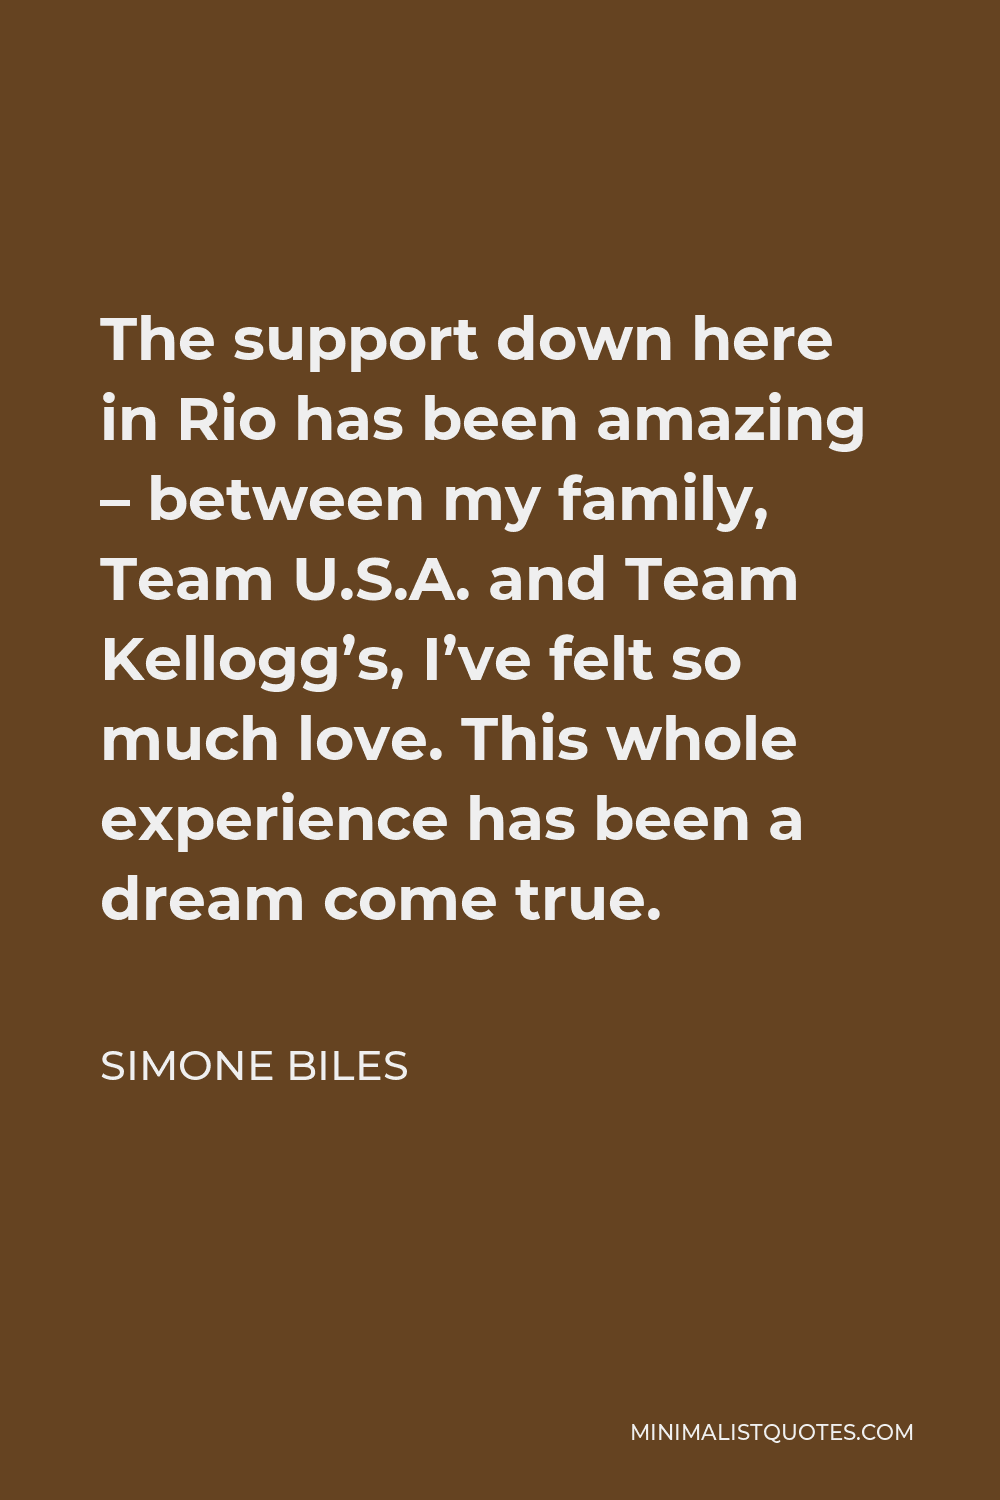 Simone Biles Quote - The support down here in Rio has been amazing – between my family, Team U.S.A. and Team Kellogg’s, I’ve felt so much love. This whole experience has been a dream come true.